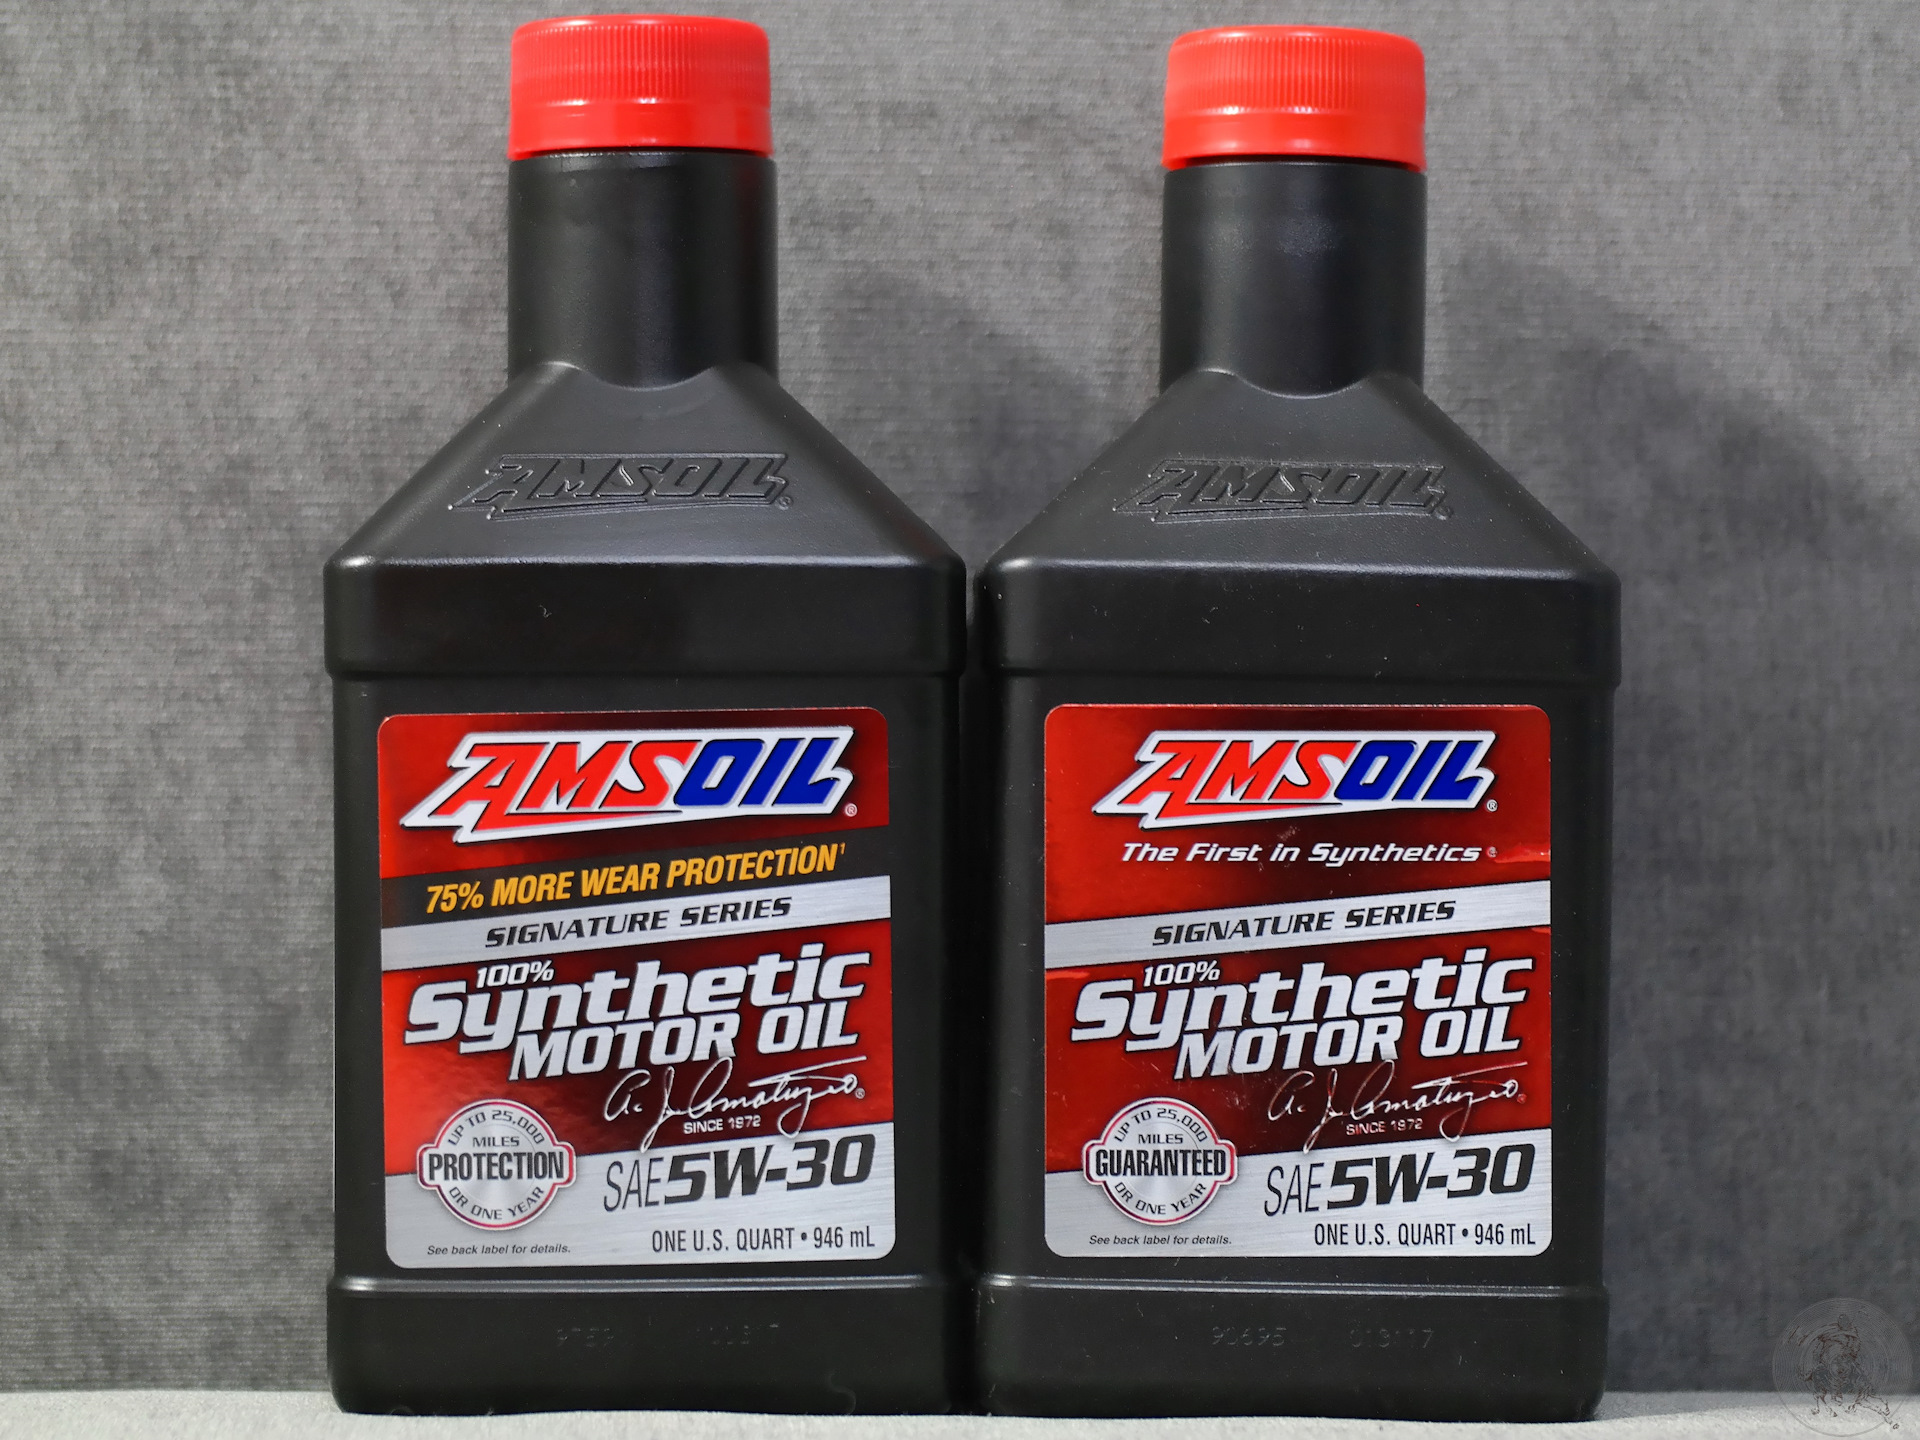 Signature series synthetic. AMSOIL 5w30. AMSOIL SS 5w30. AMSOIL 5w30 Signature. AMSOIL Signature Series 5w-30.